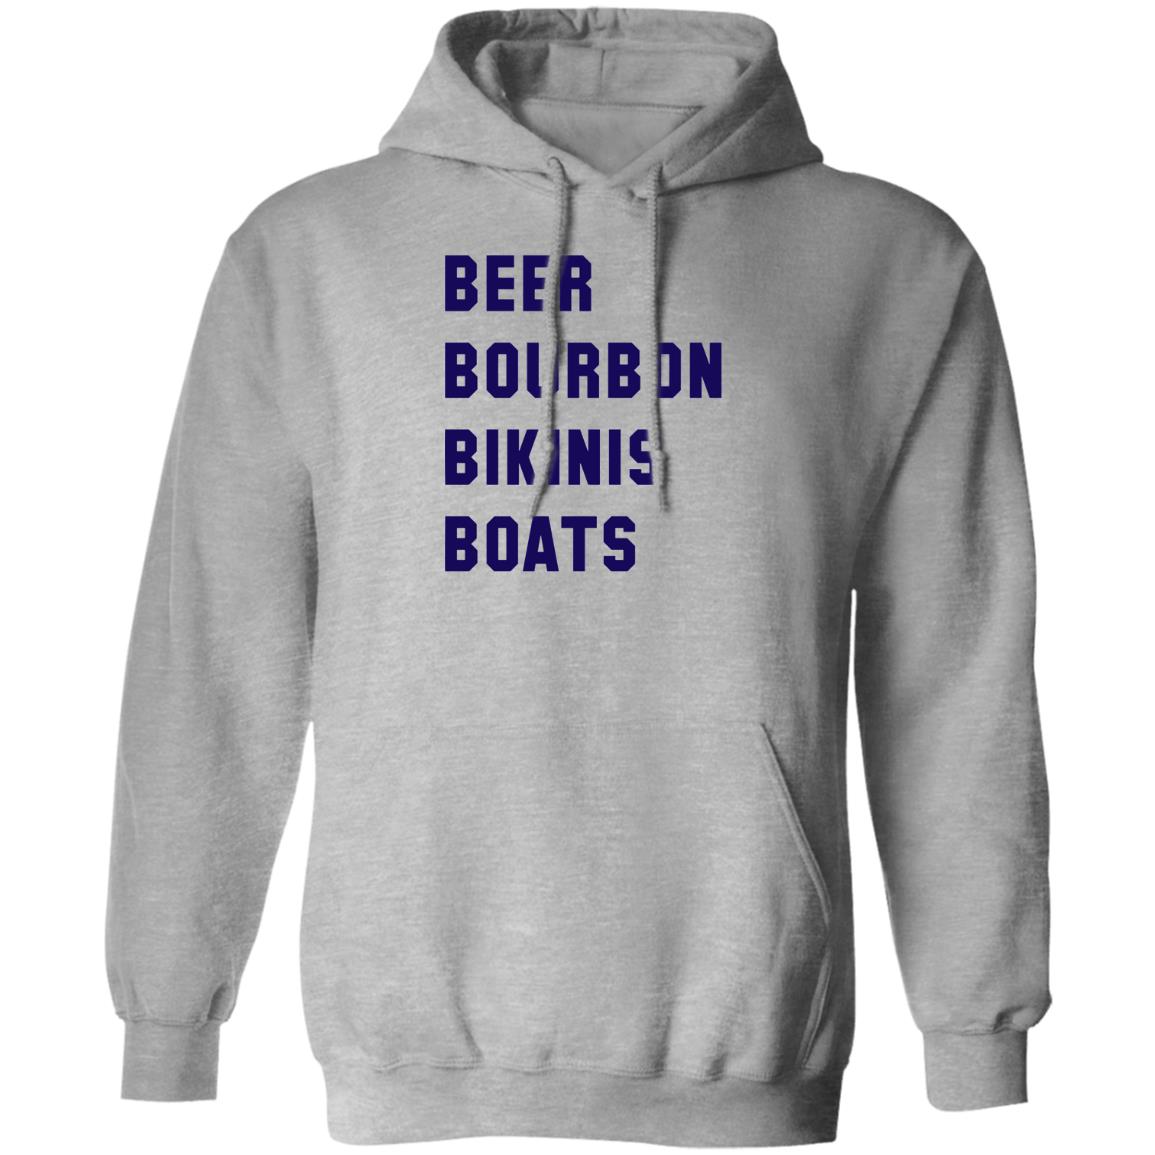 HRCL FL - Navy Beer Bourbon Bikinis Boats - 2 Sided G185 Pullover Hoodie